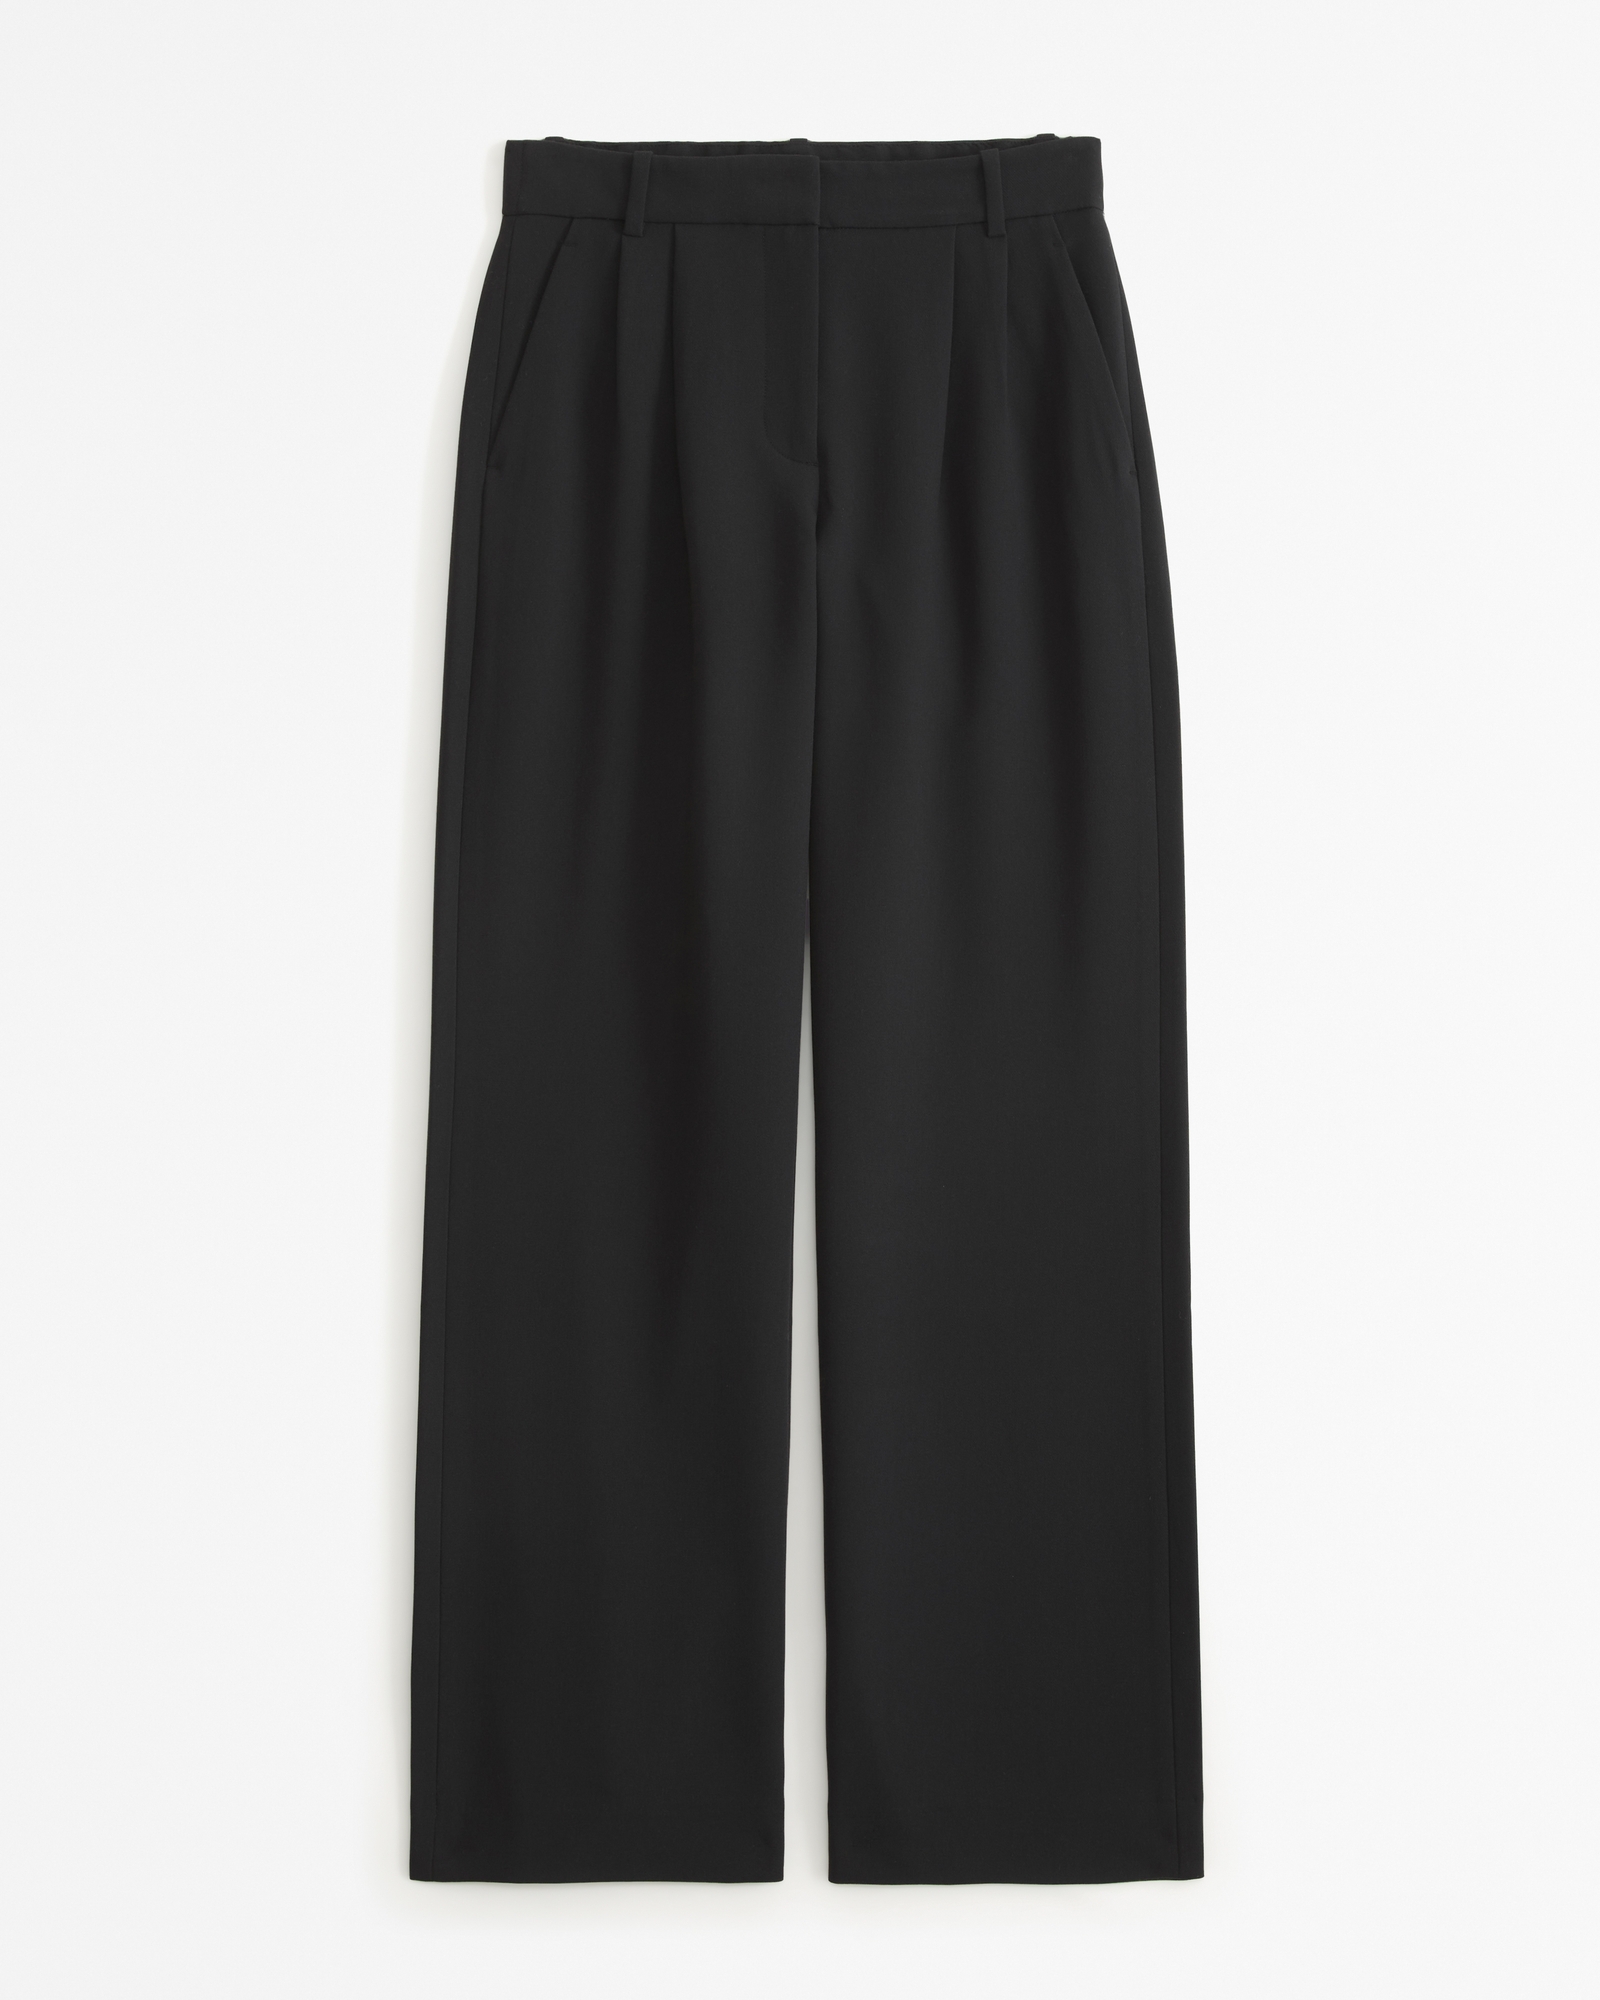 A&F Sloane Tailored Mid Rise Pant